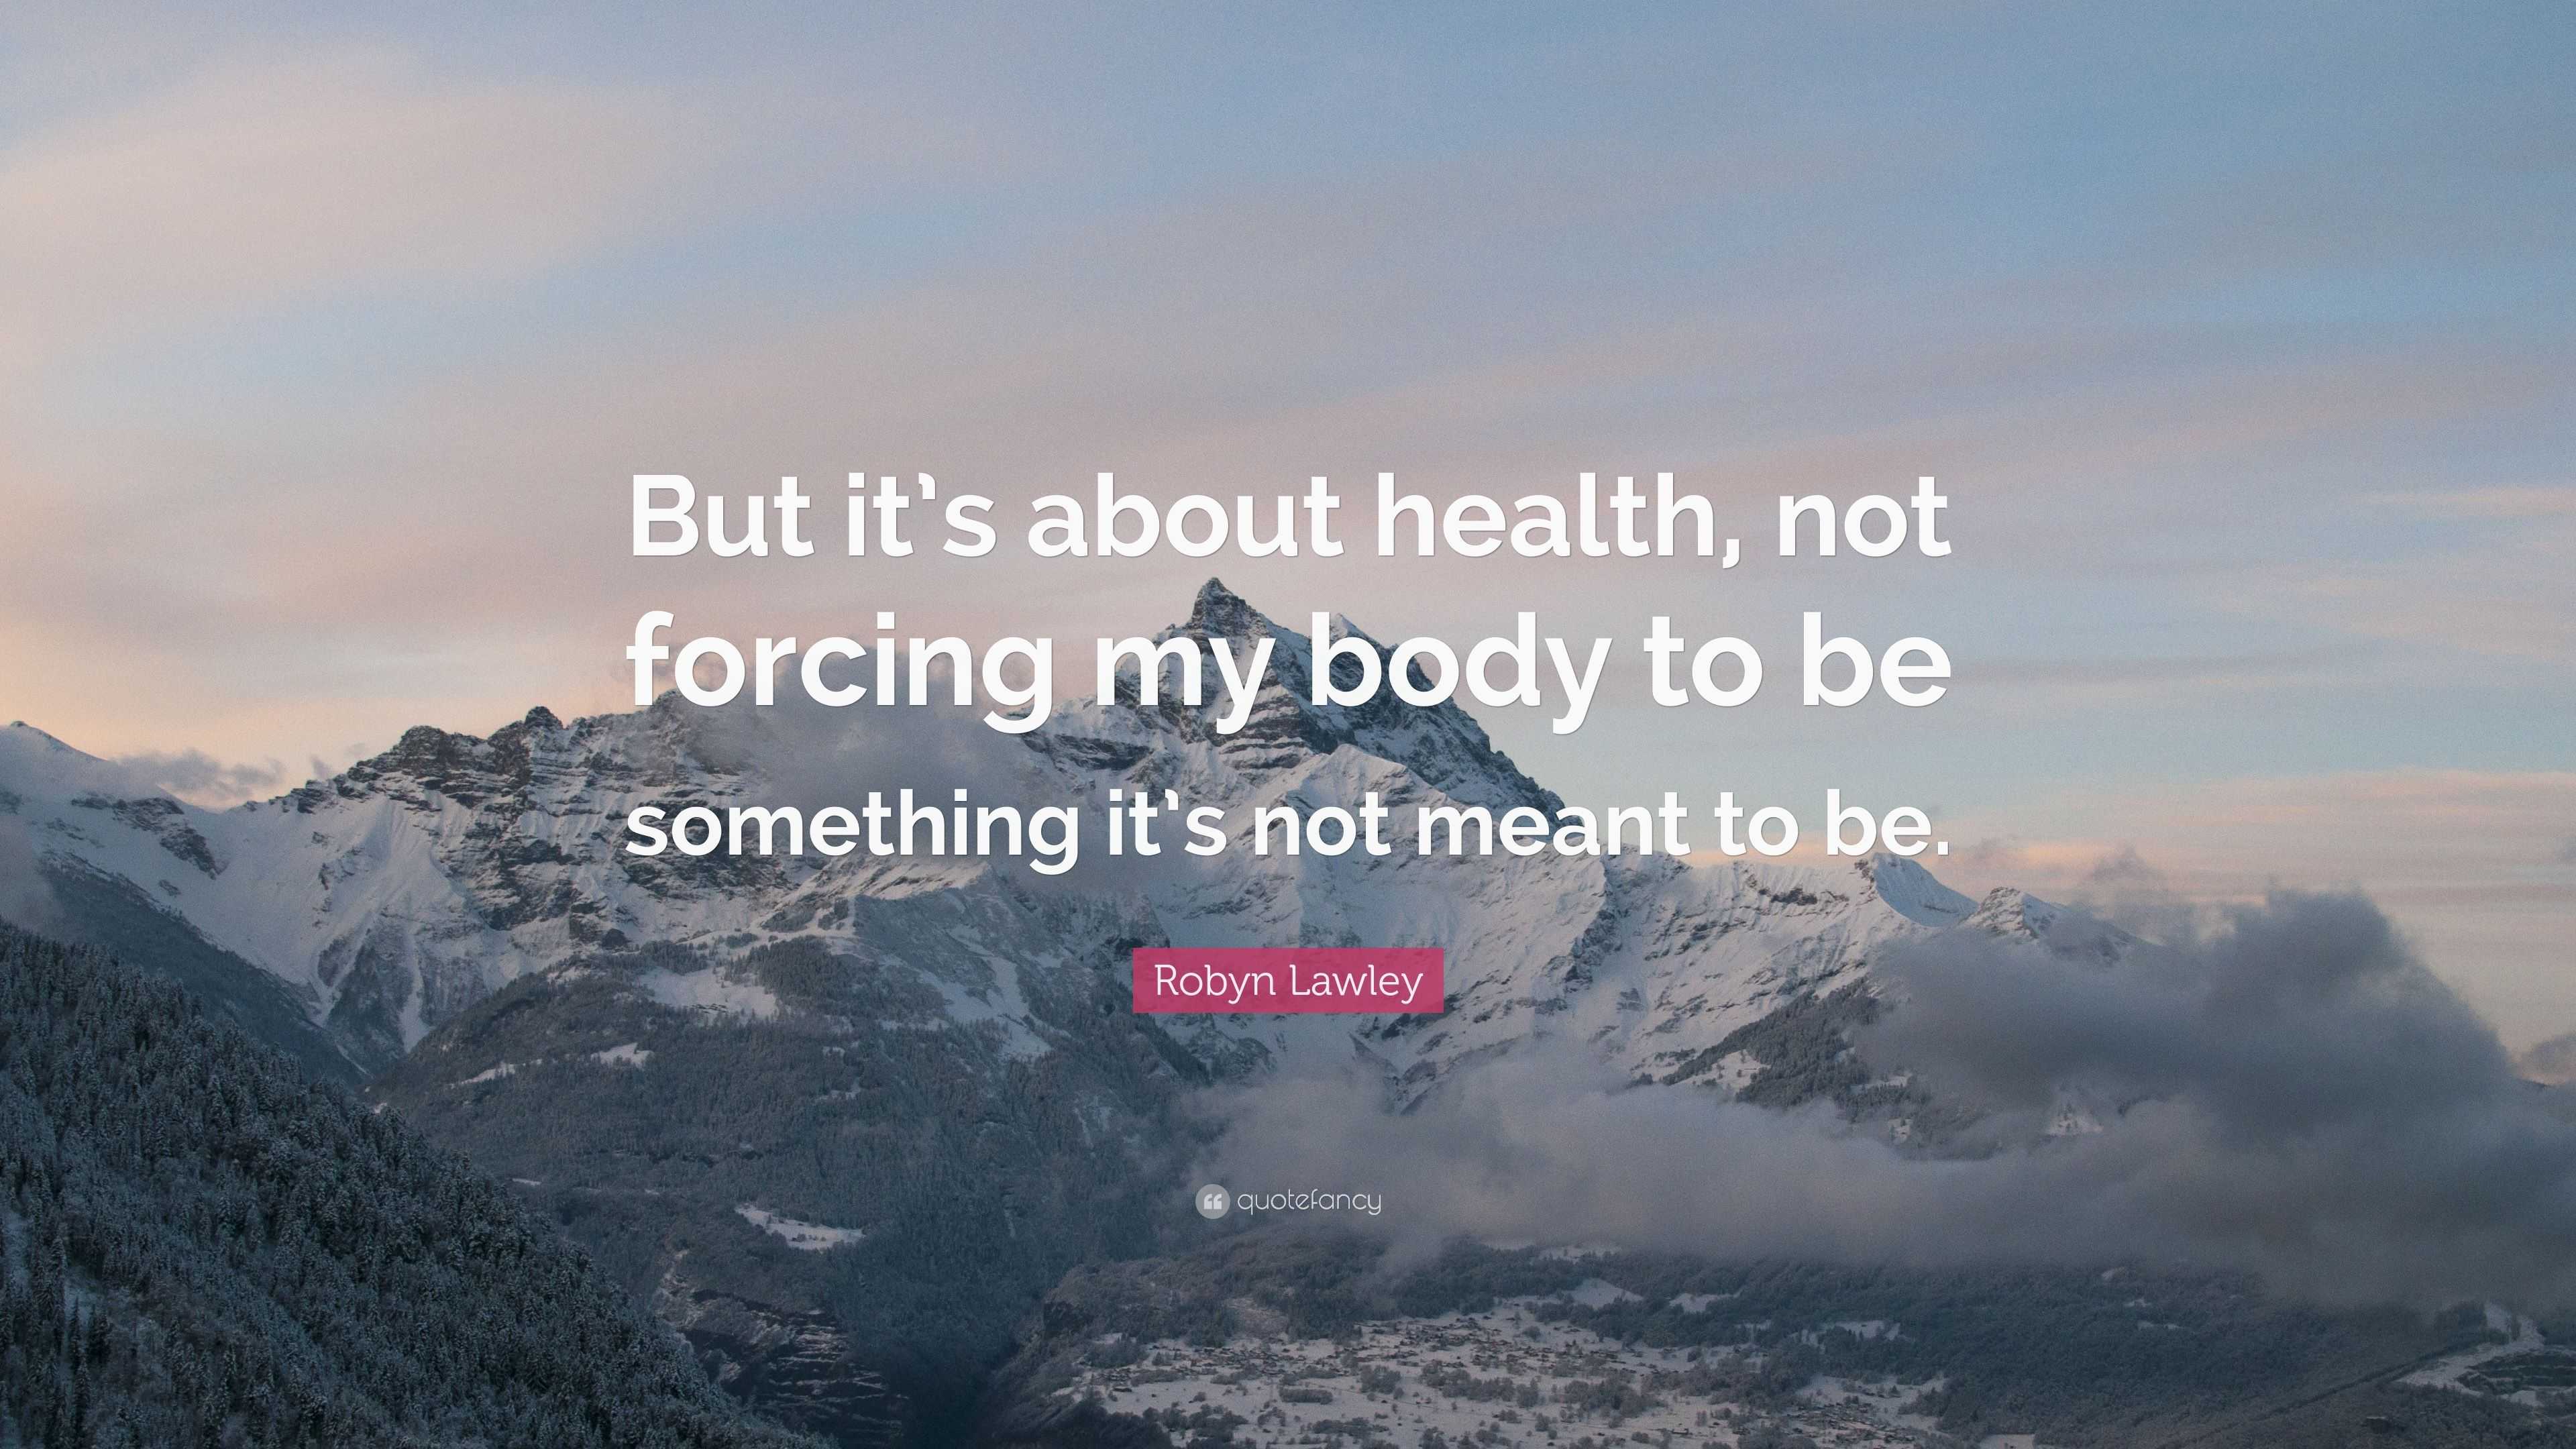 Robyn Lawley Quote: “But it's about health, not forcing my body to be  something it's not